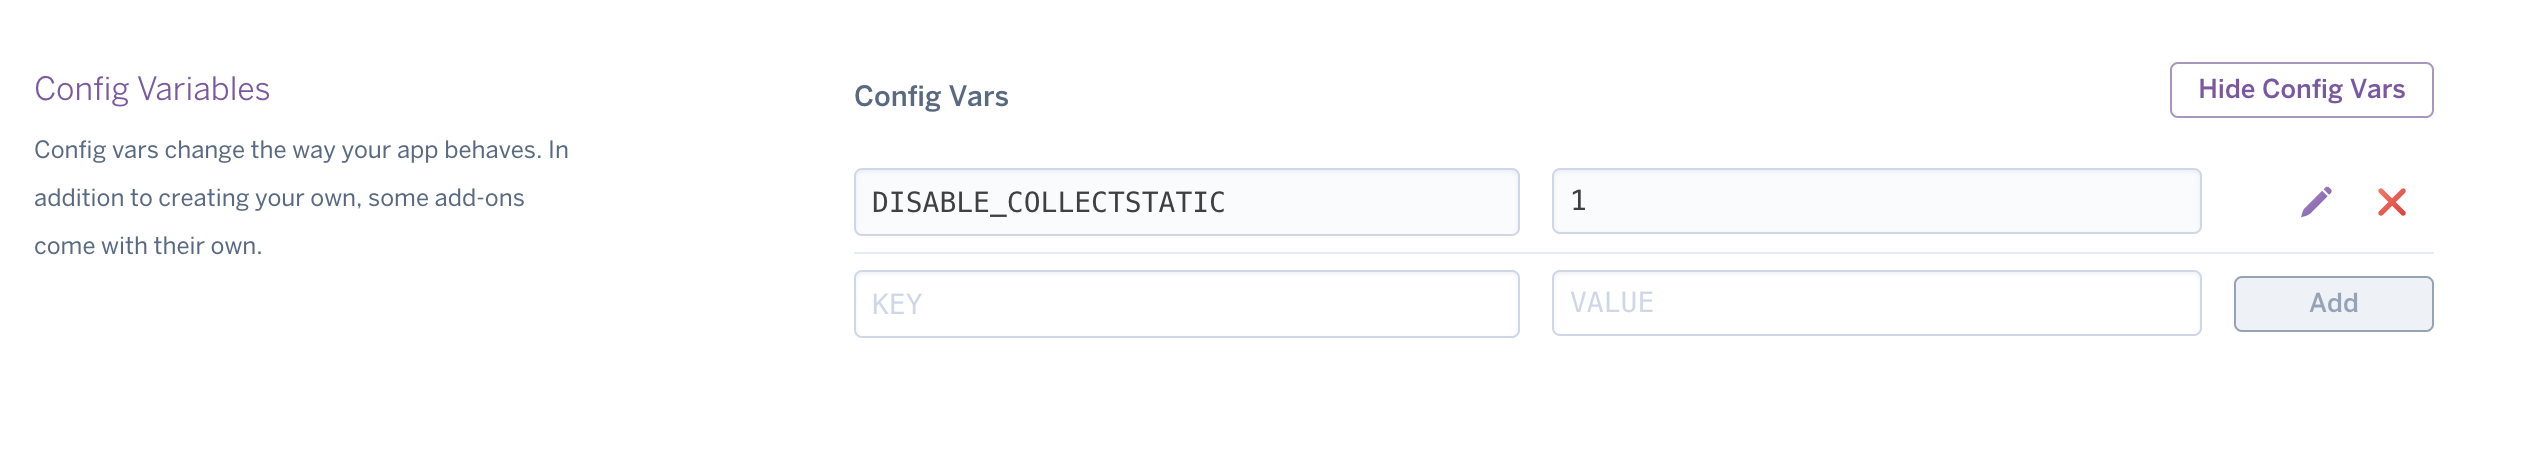 Disable Collectstatic